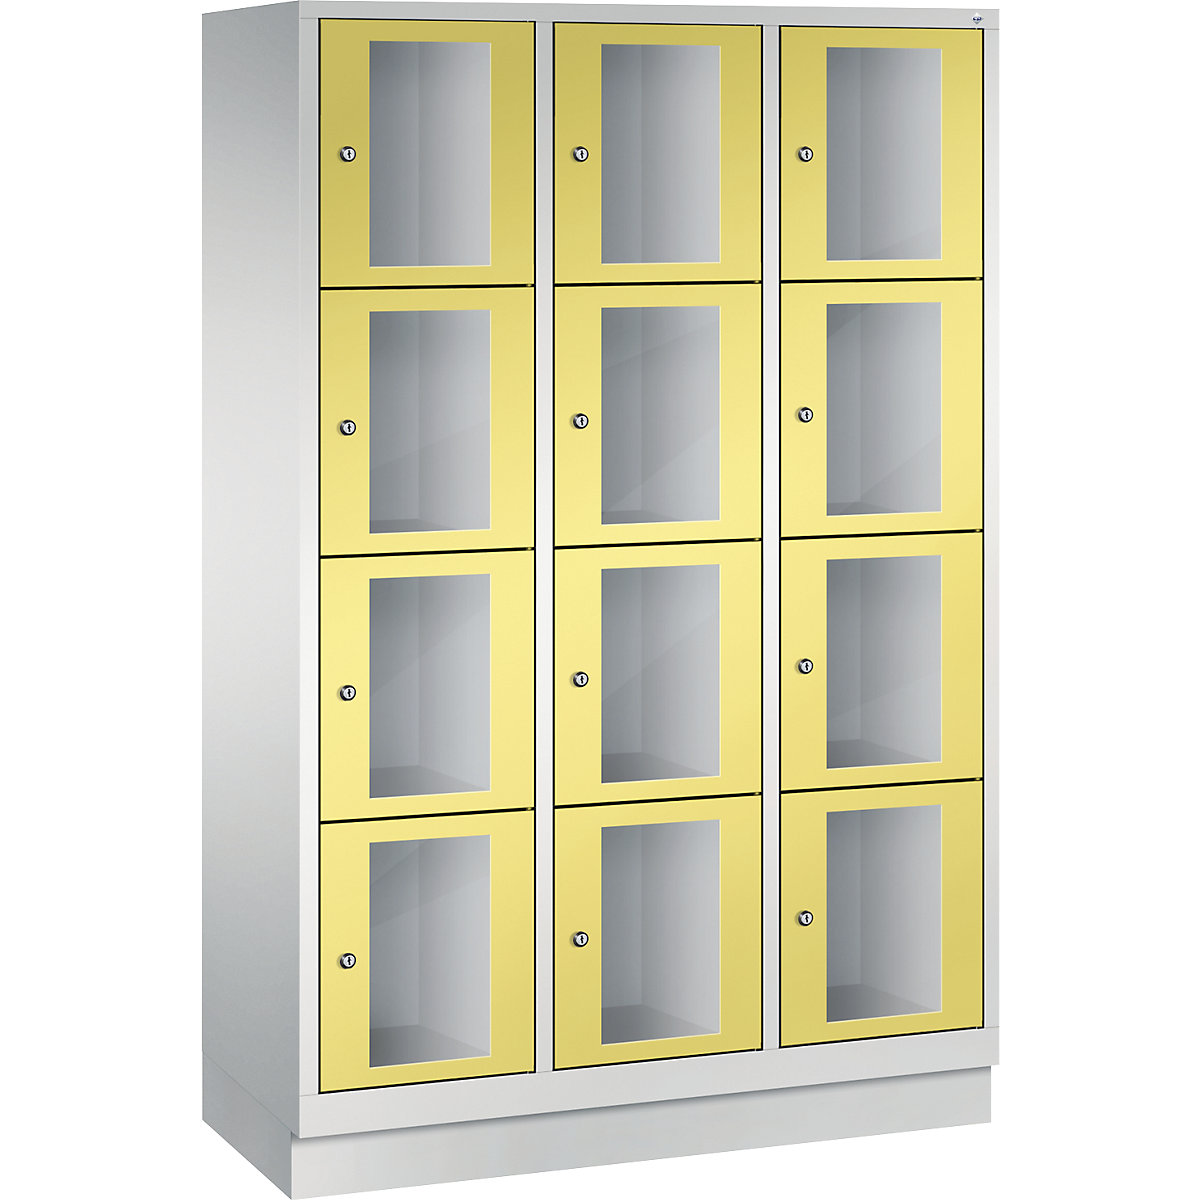 C+P – CLASSIC locker unit, compartment height 375 mm, with plinth, 12 compartments, width 1200 mm, sulphur yellow door